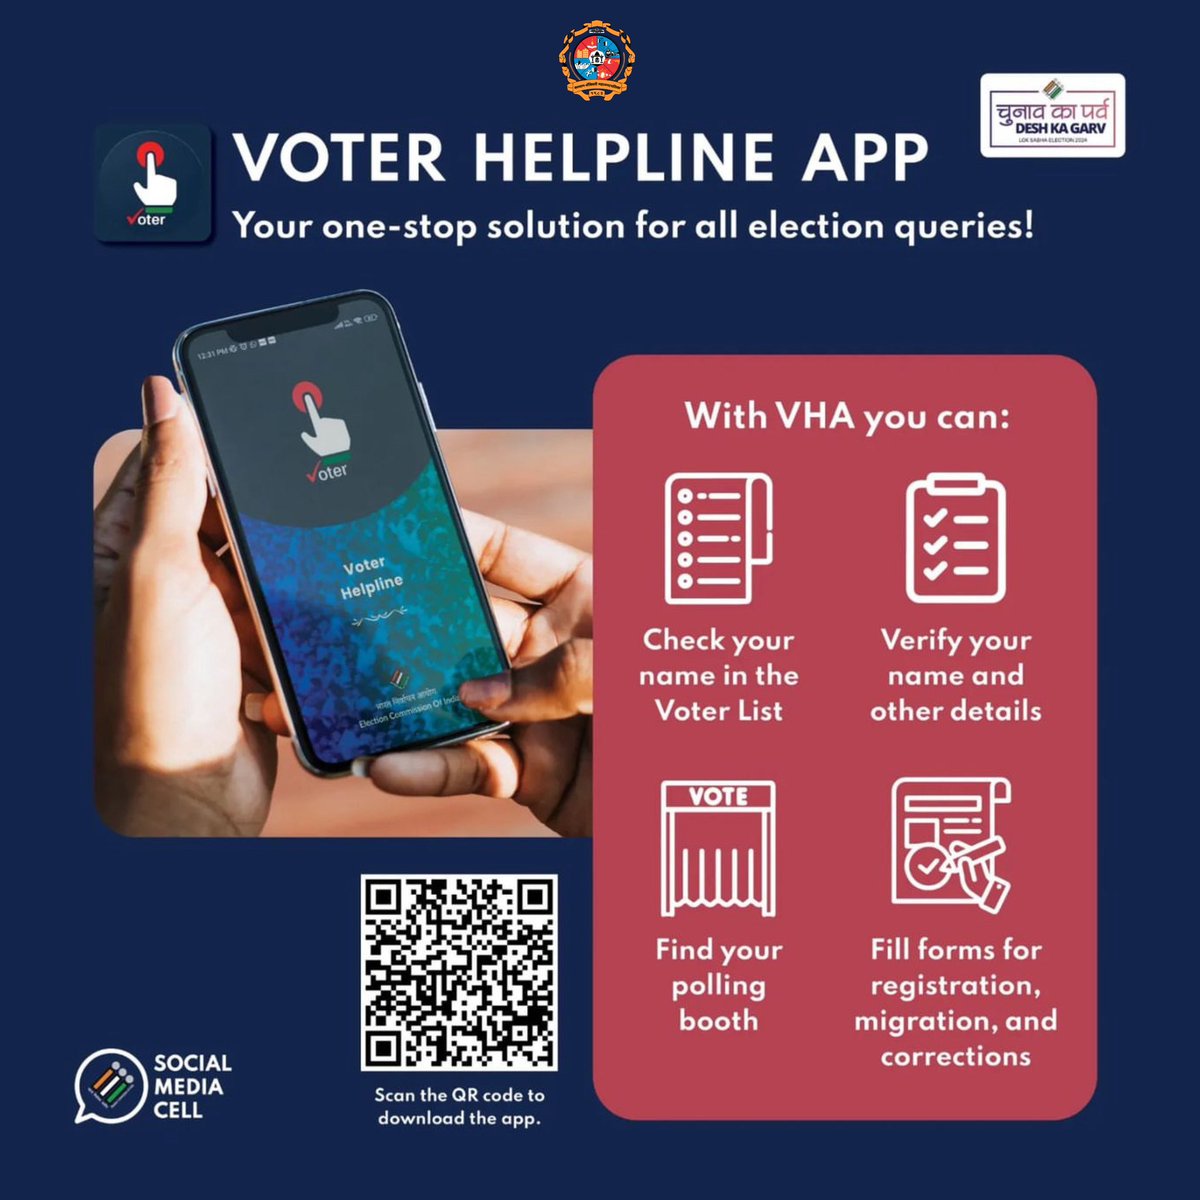 #VoterHelpline is your friend indeed! Using our Voter Helpline App you can: Request new forms Lodge Complaints Confirm your name in the voter list #CEOMaharashtra #eci #kdmc #deothane #ecisveep #voting #voteismust #voteispower #votekaro #thanedistrict #novotertobeleftbehind